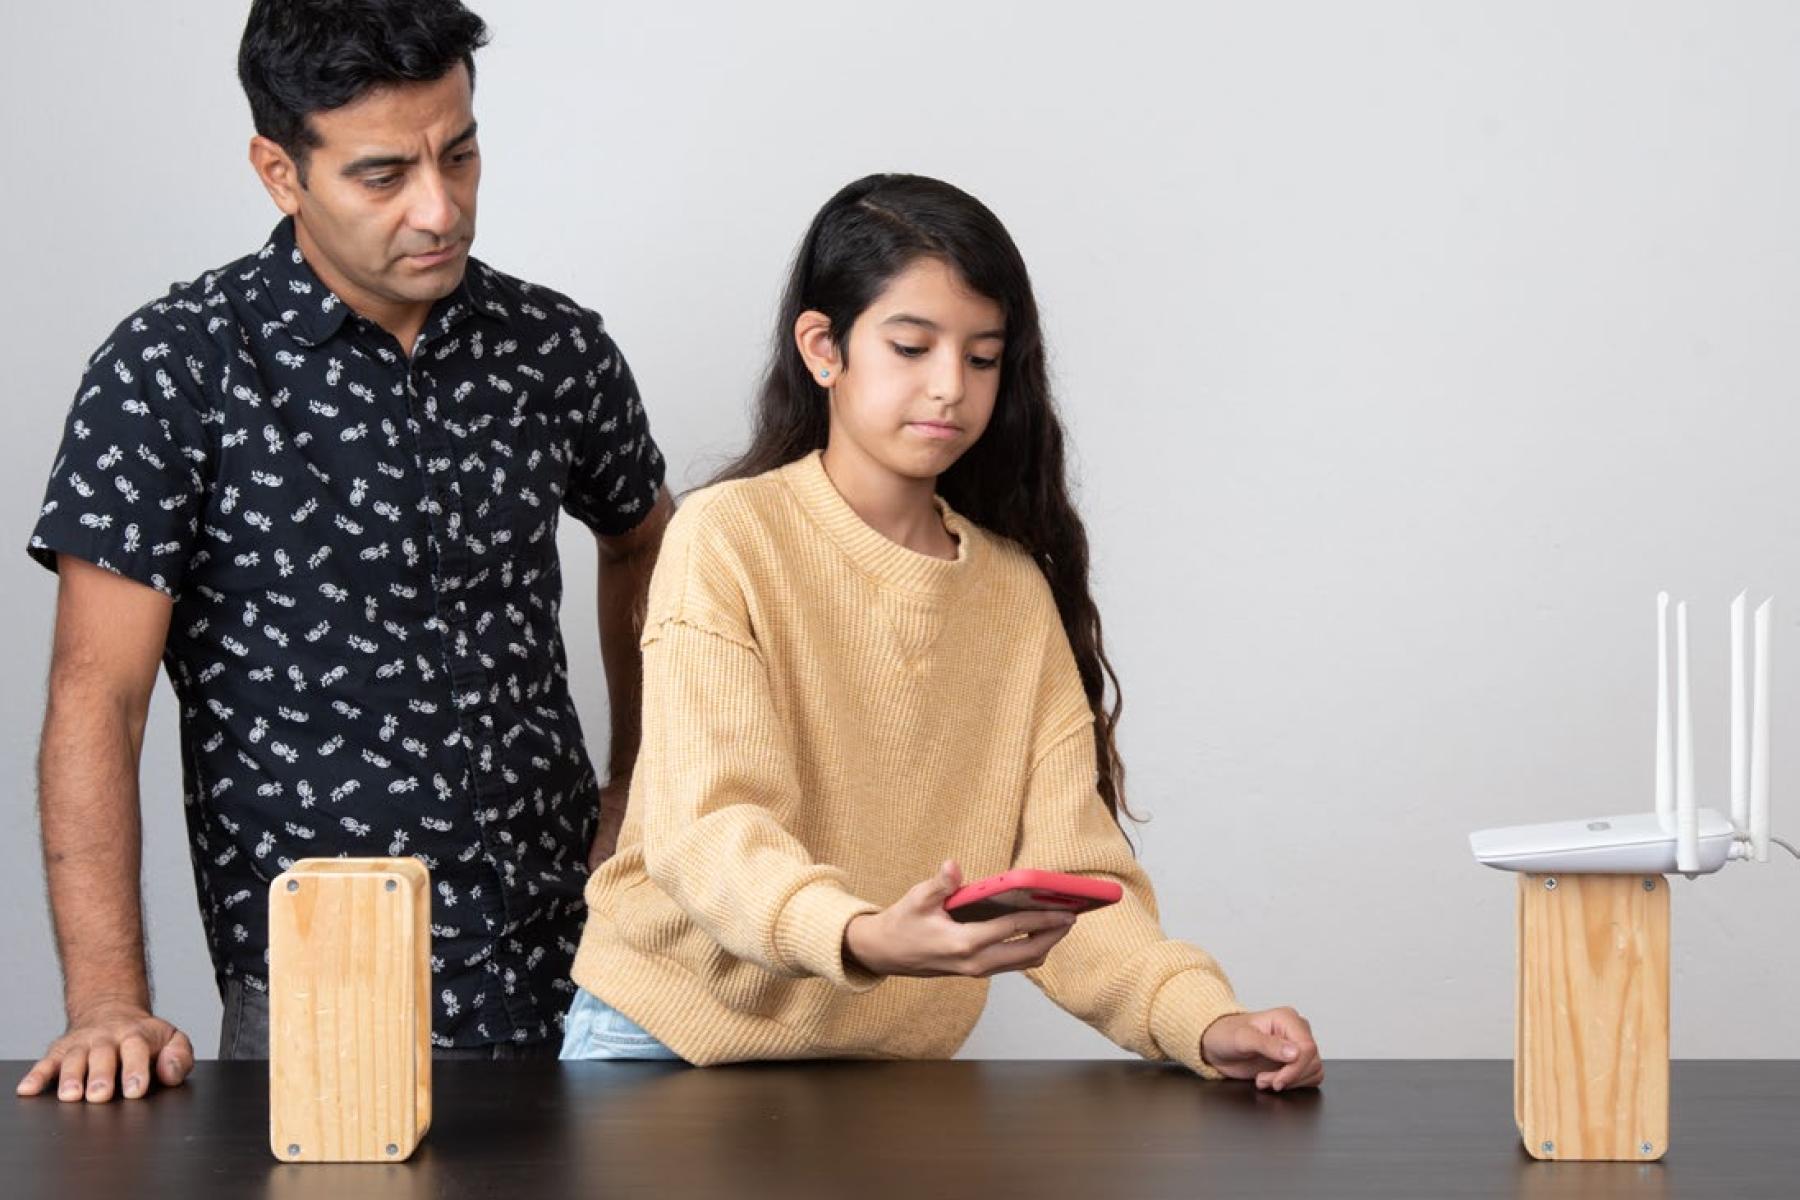 A child holds a smart phone in between two blocks of wood, placed apart on on a table, while an adult looks on. The block of wood on the right holds a Wi-Fi router. 